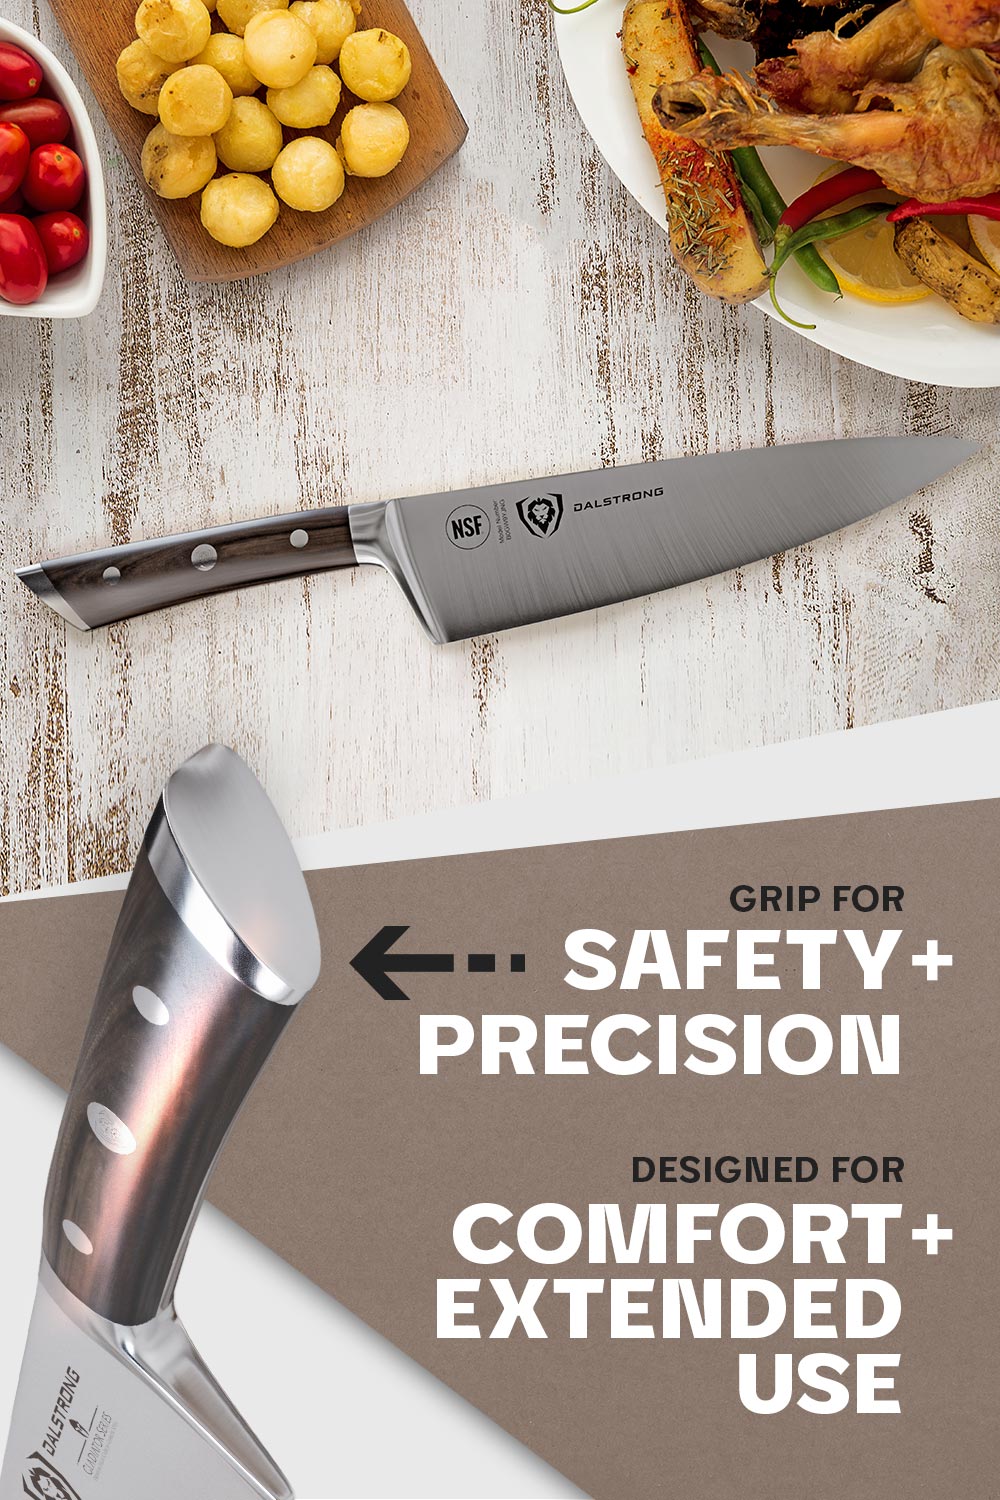 Dalstrong gladiator series 8 inch chef knife showcasing it's grip and comfortable handle.